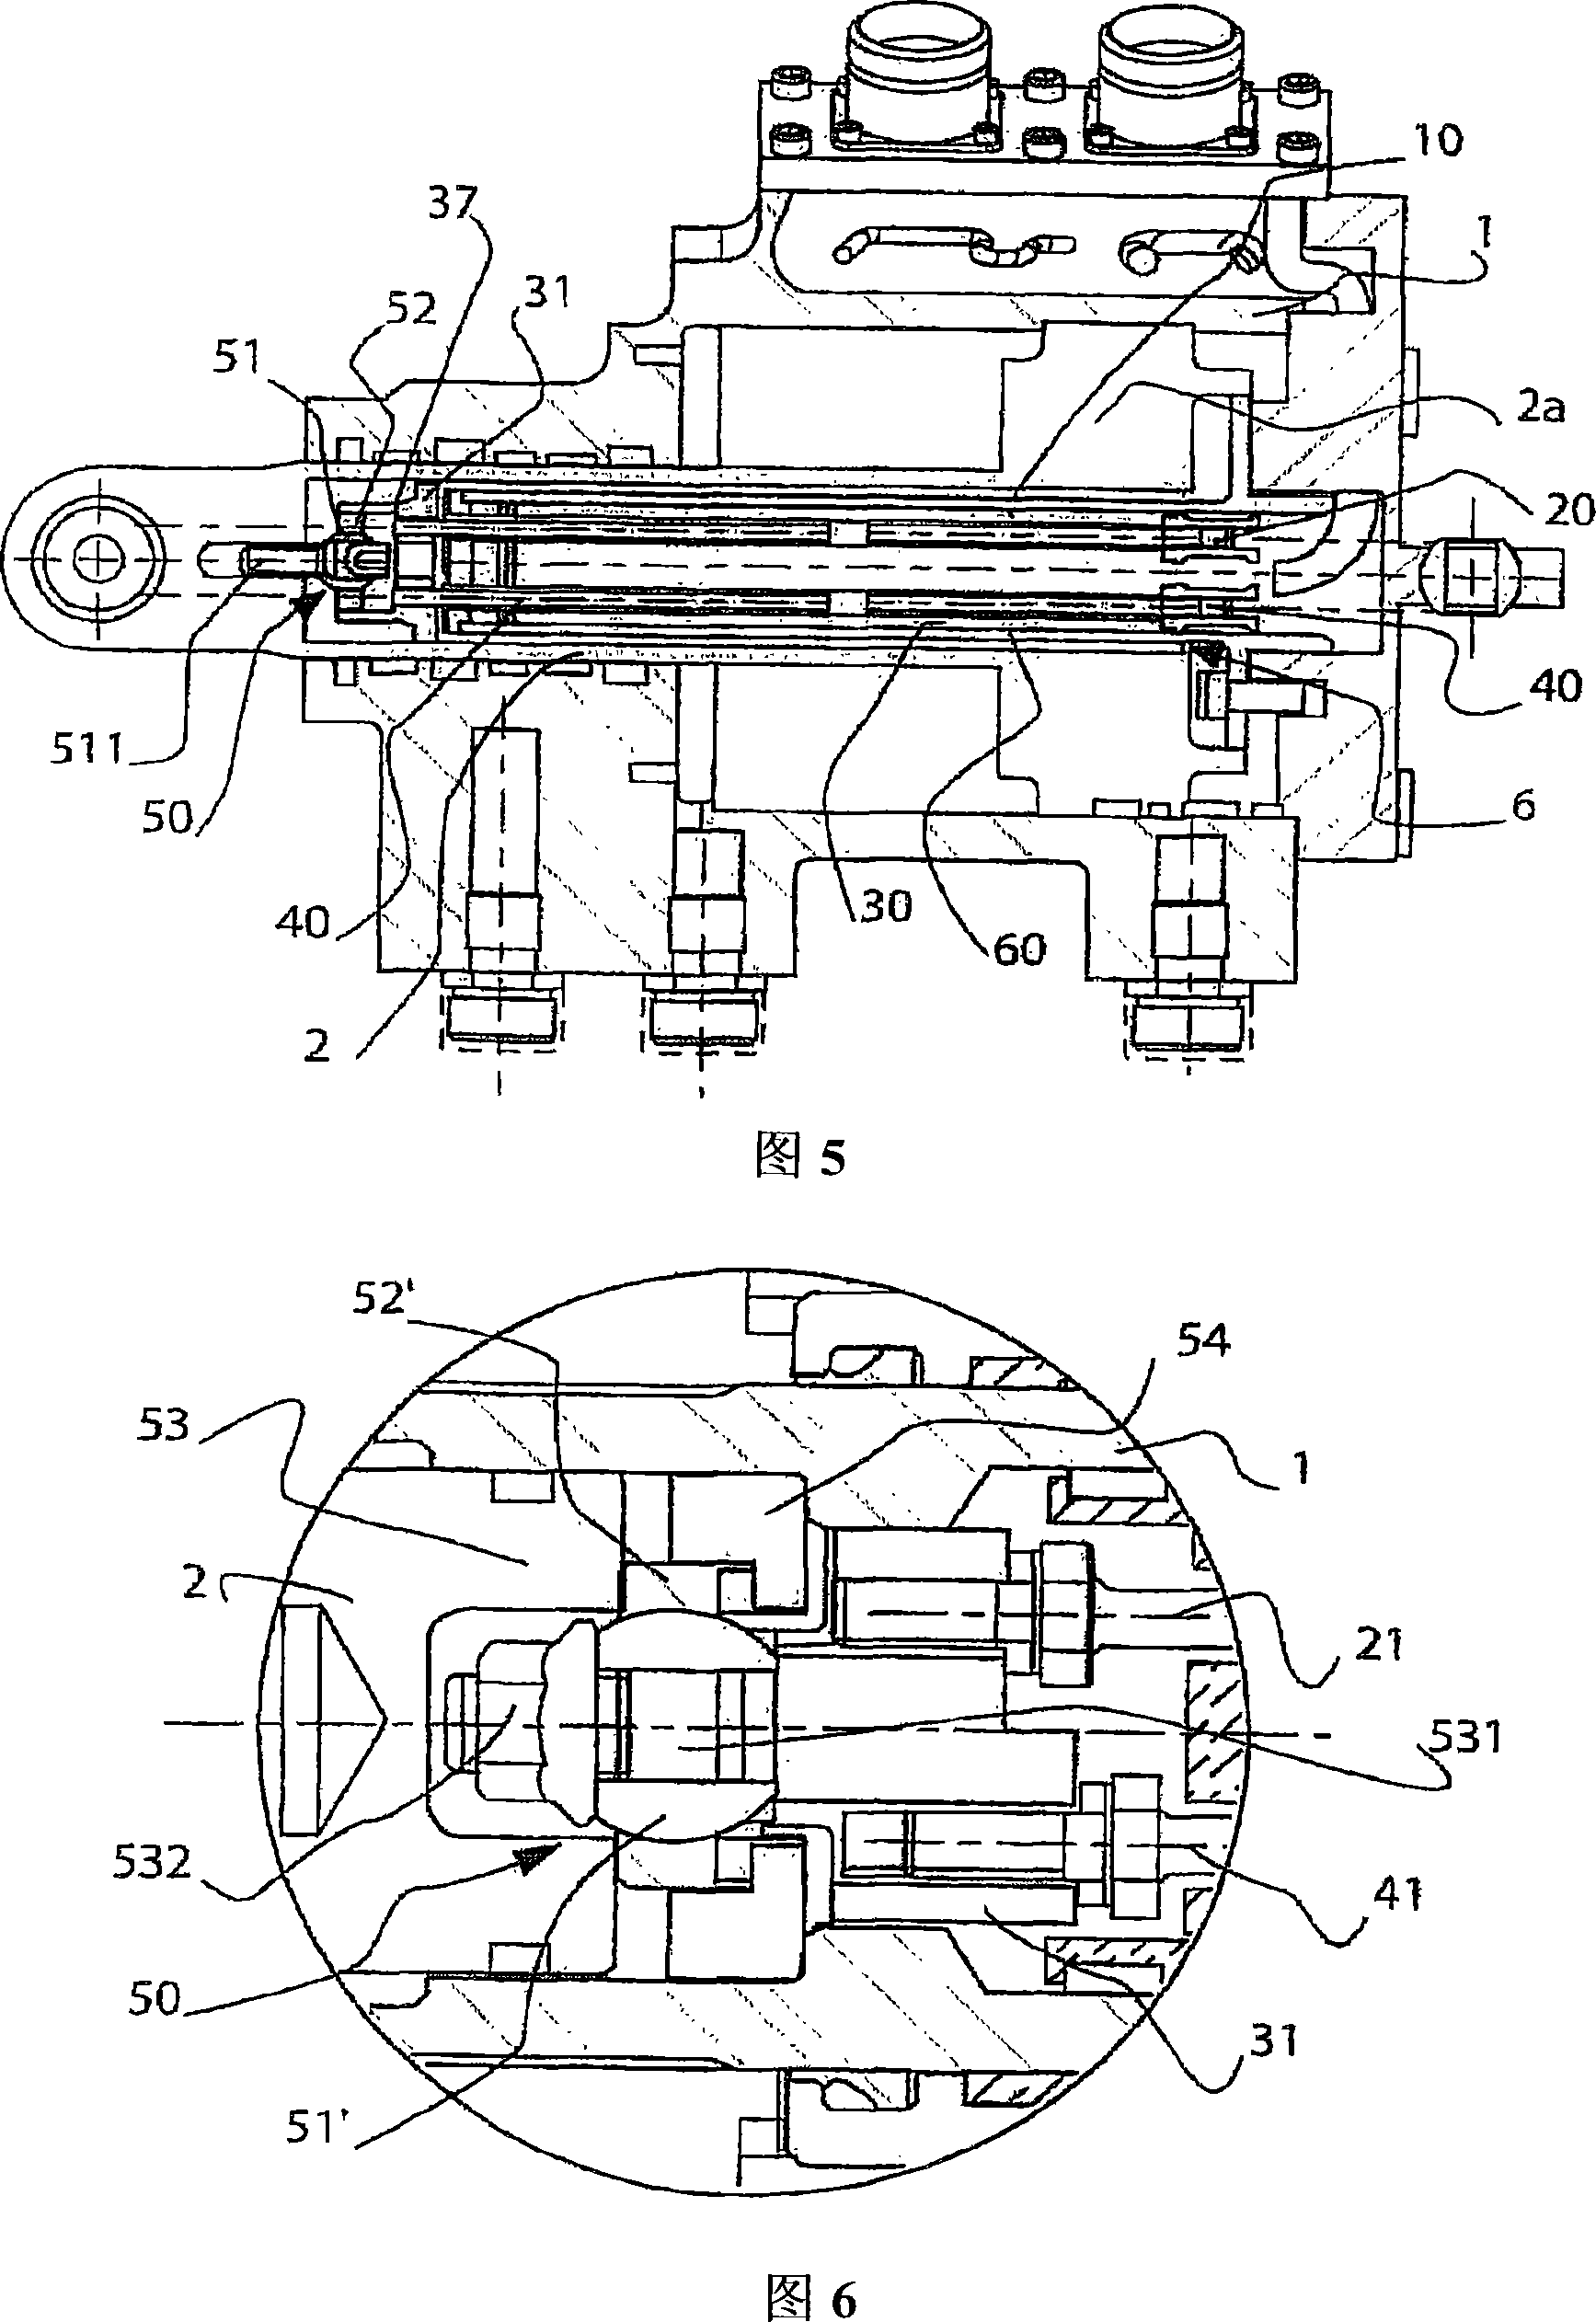 Apparatus for measuring the position of a piston in a cylinder